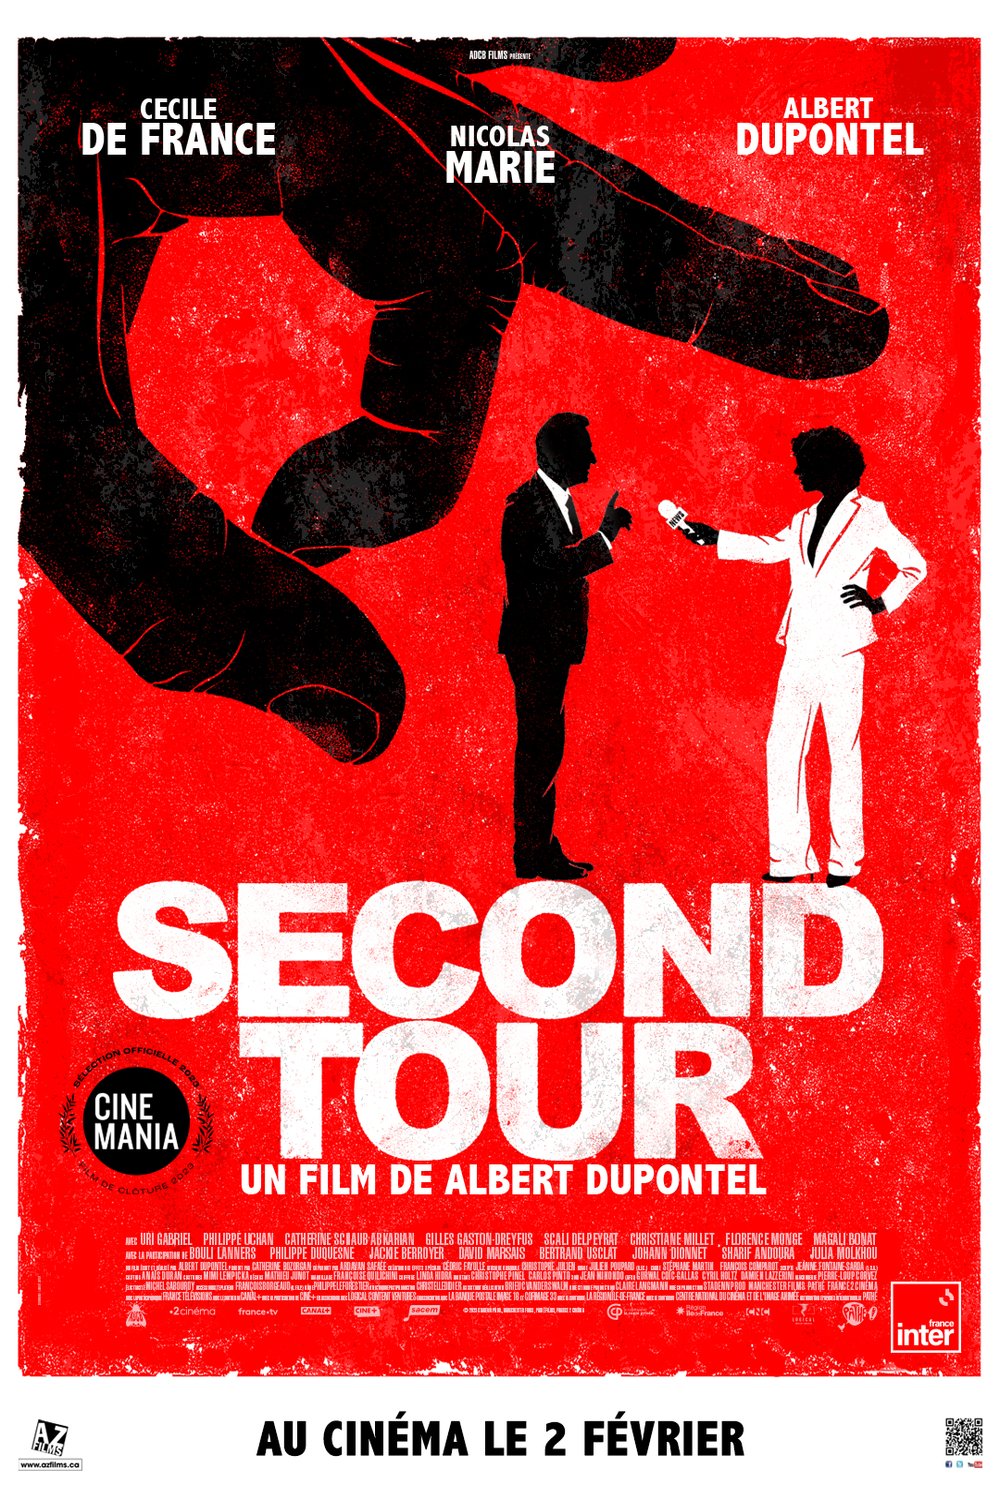 Poster of the movie Second tour